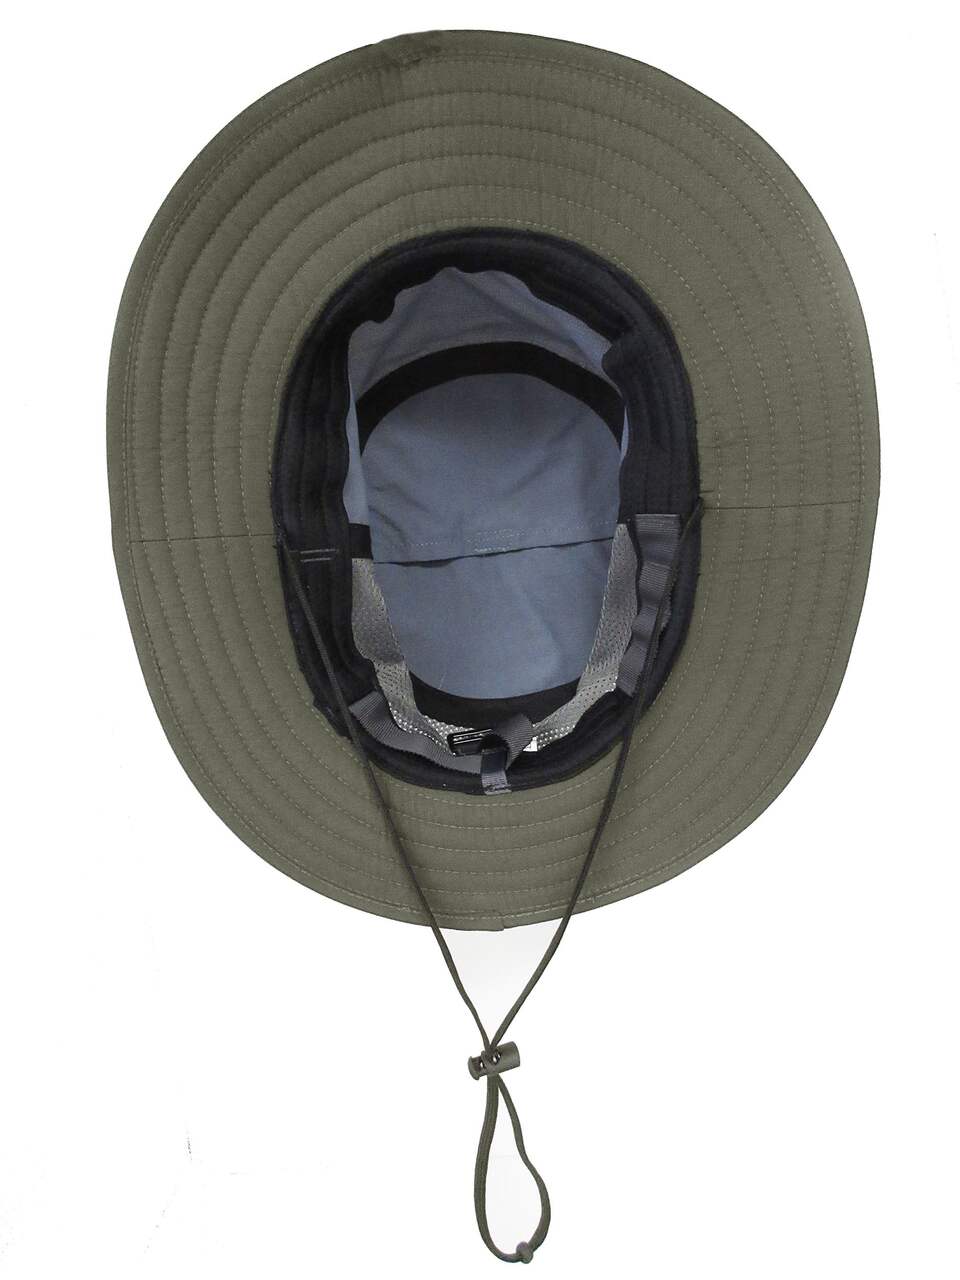 Outbound Wide Brim Sun Hat with Mesh Panel, Olive, One-Size